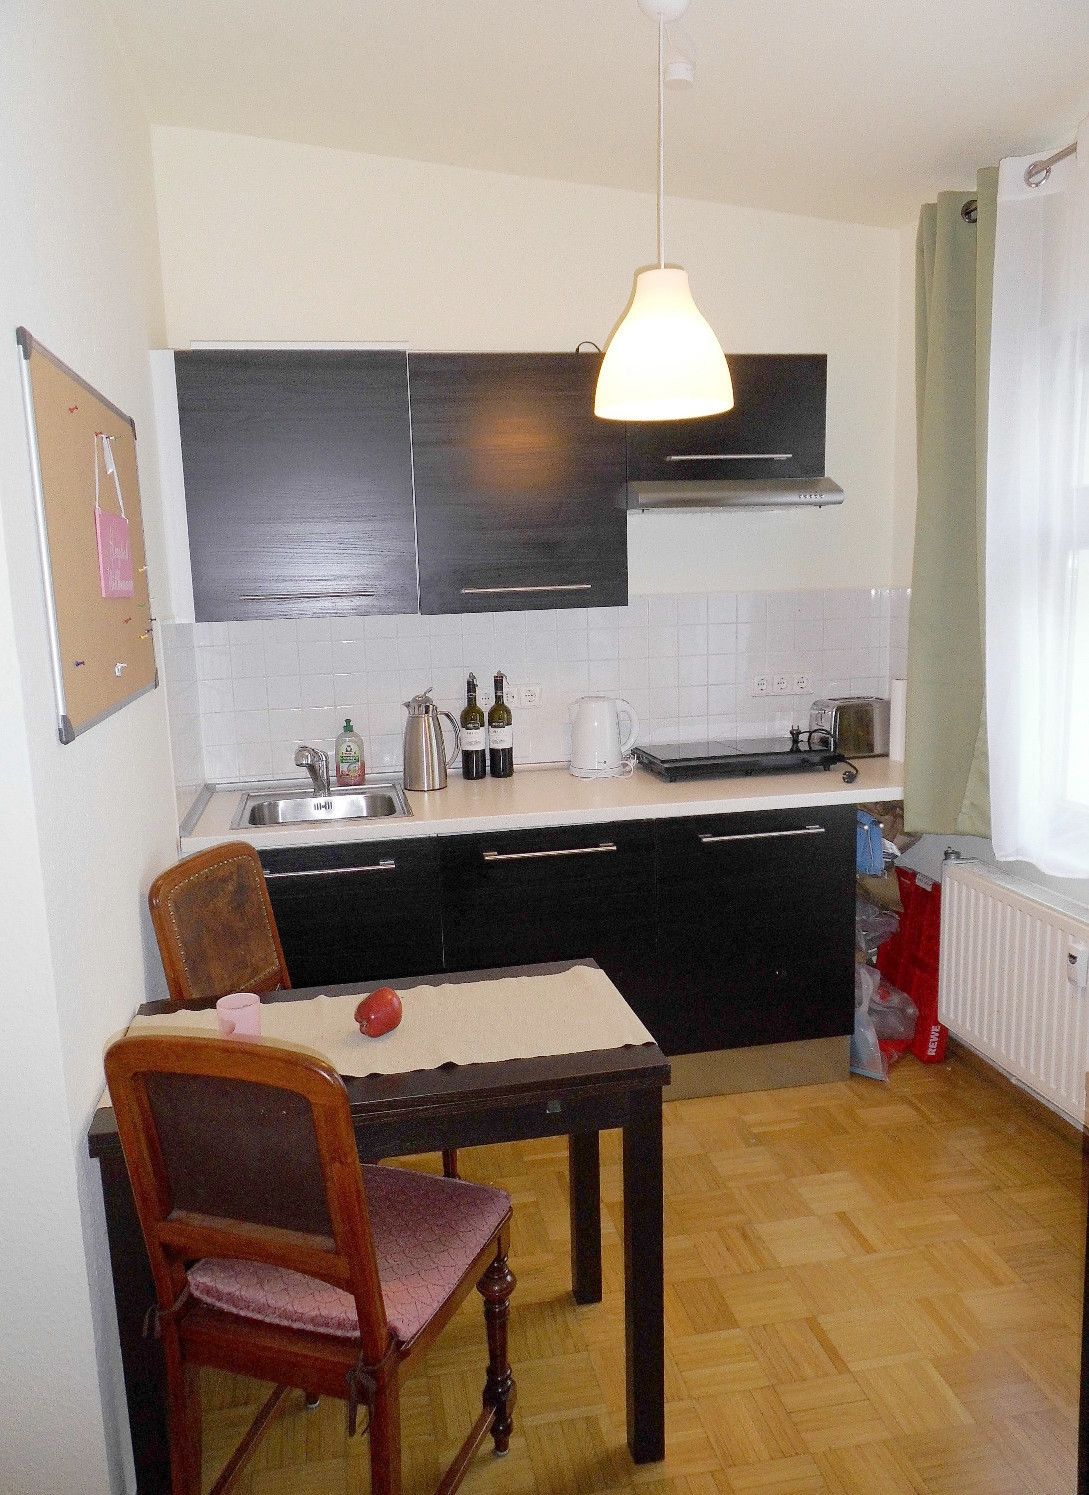 Top apartment in absolute prime location in the center of Leipzig: in 10 minutes walk through the Clara Park in the city center (WE11).